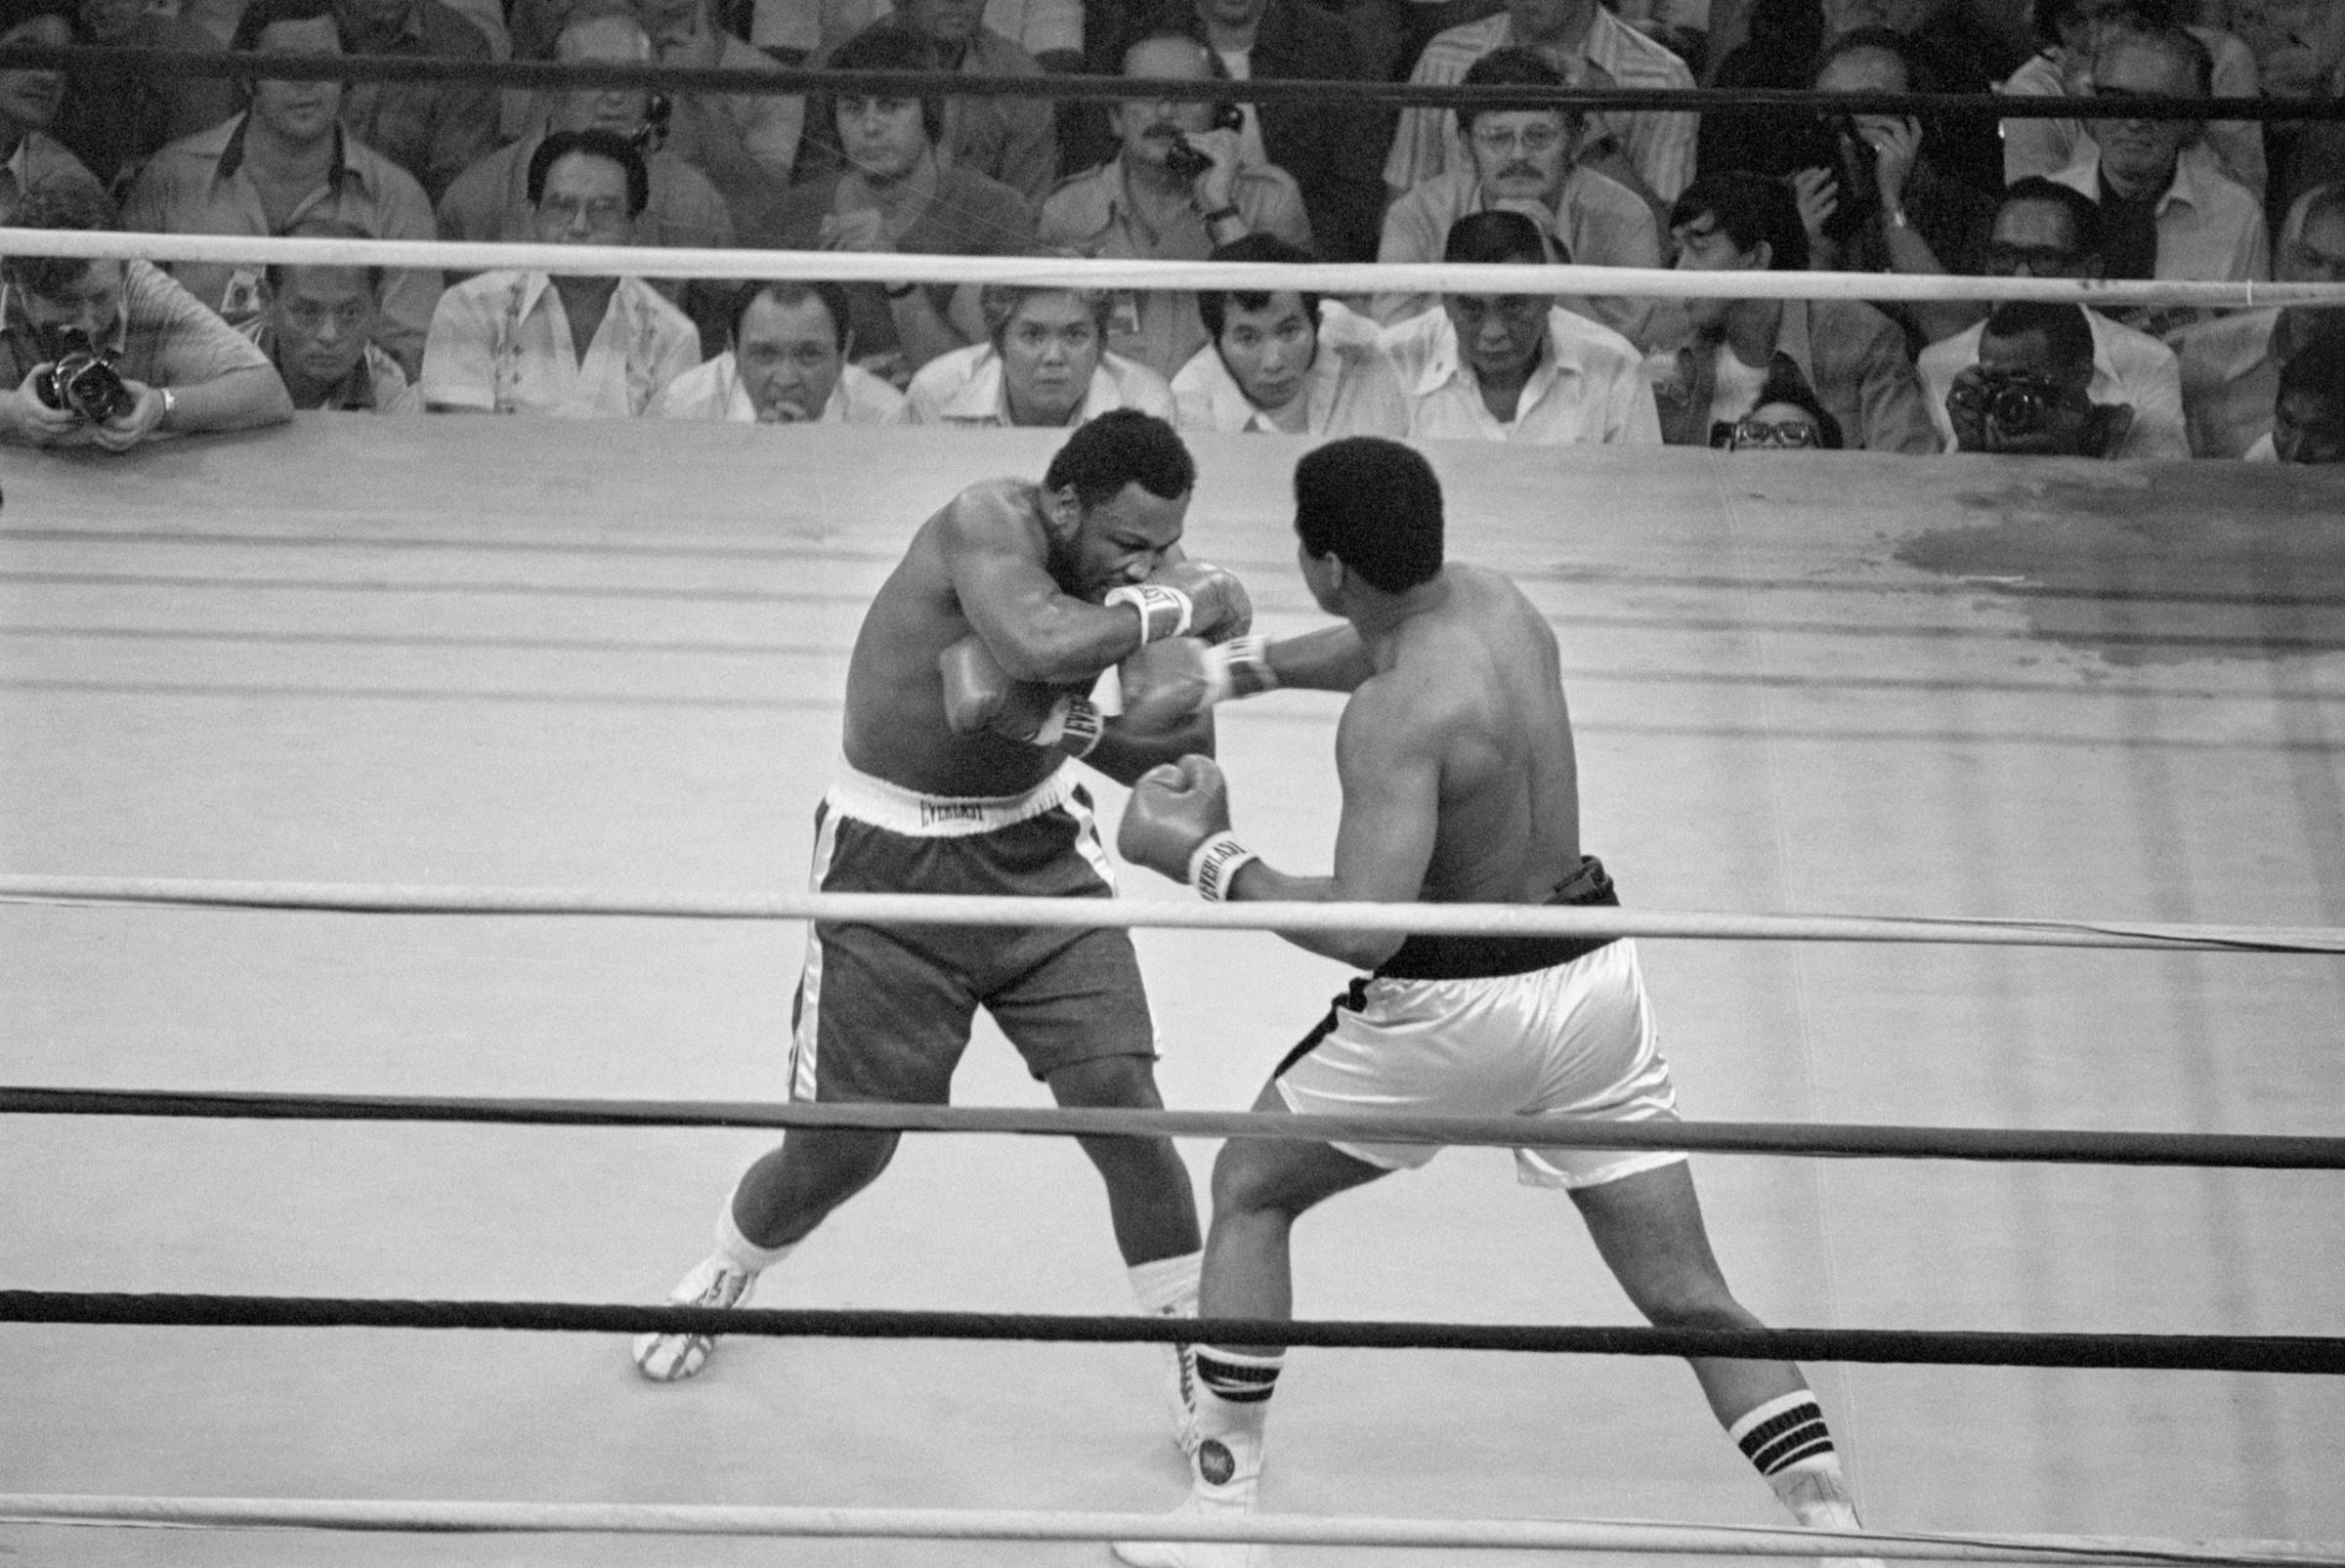 October 1, 1975, Manila, Luzon Island, Philippines—Heavyweight champion Muhammad Ali punches Joe Frazier during their title bout in Manila in 1975.